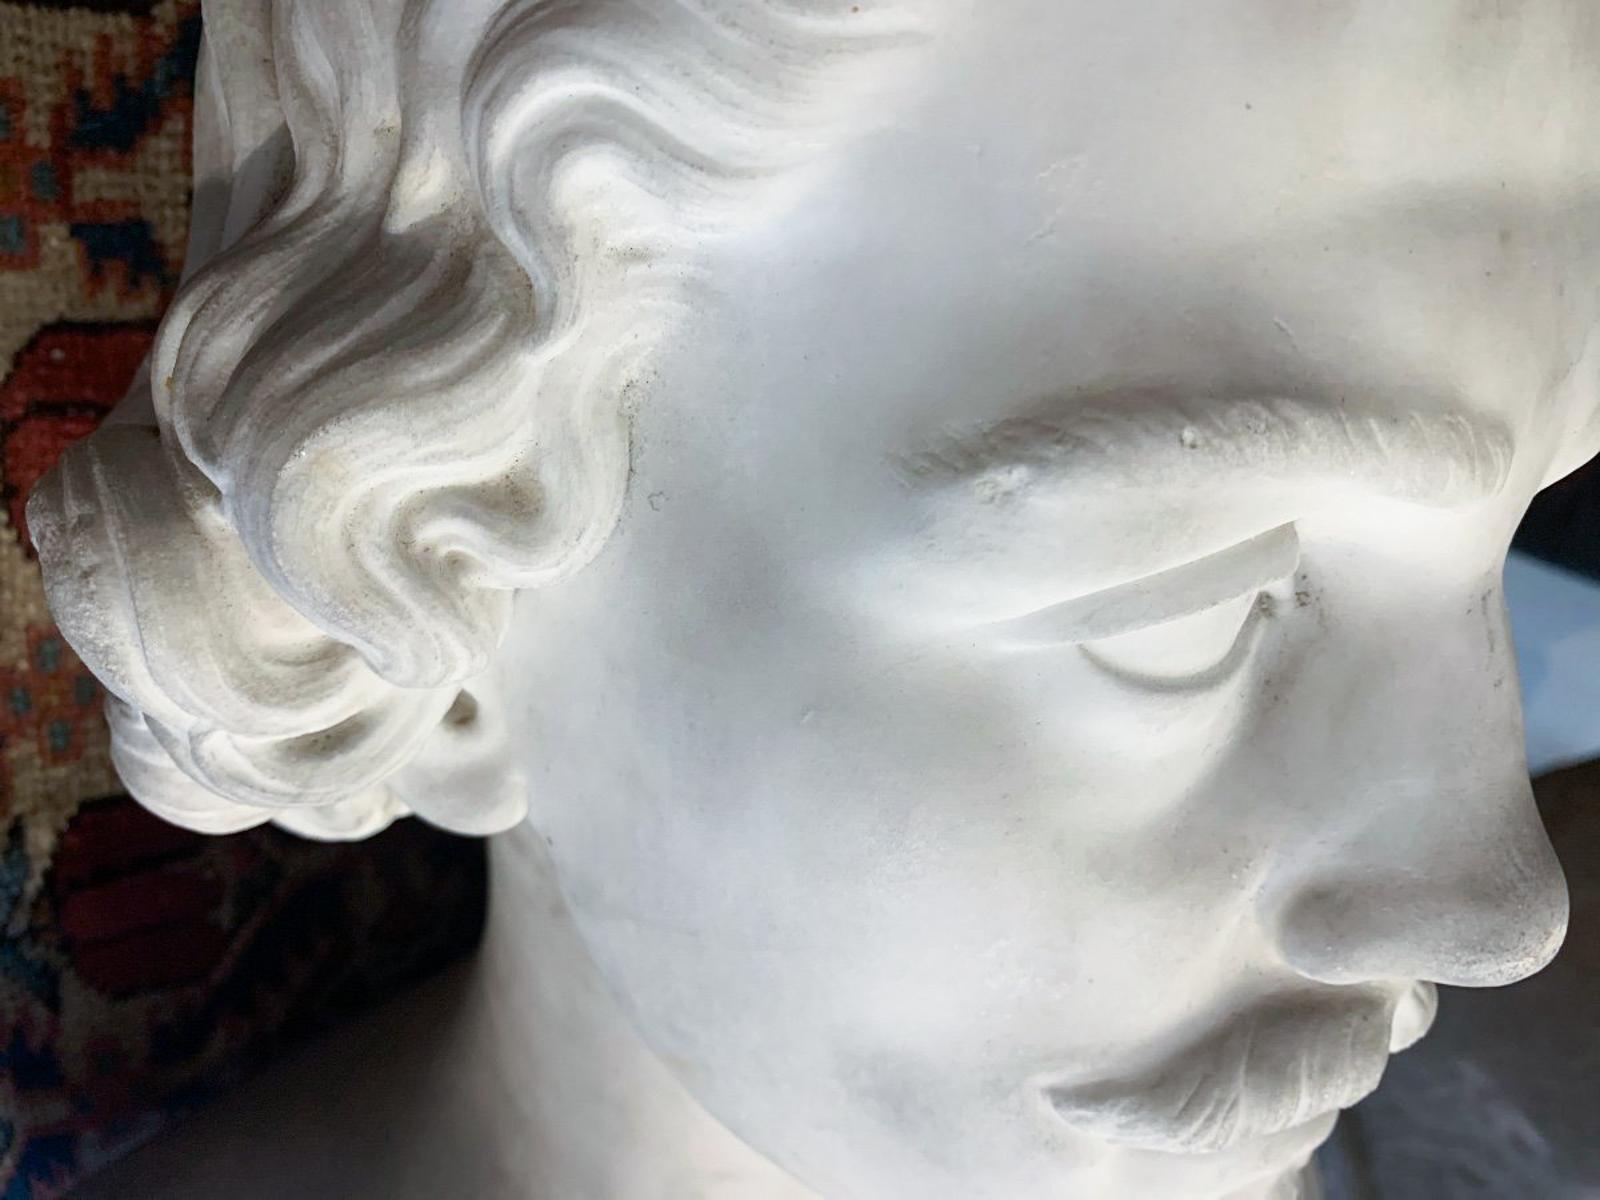 Italian Portrait White Marble Bust in a Heroic Attitude.
Carrara statuary Marble.
Tuscan school.
Circa 1850. 
Bust depicting a young man with bare shoulders.
This model draws inspiration from the neoclassical era, with idealizations and heroic